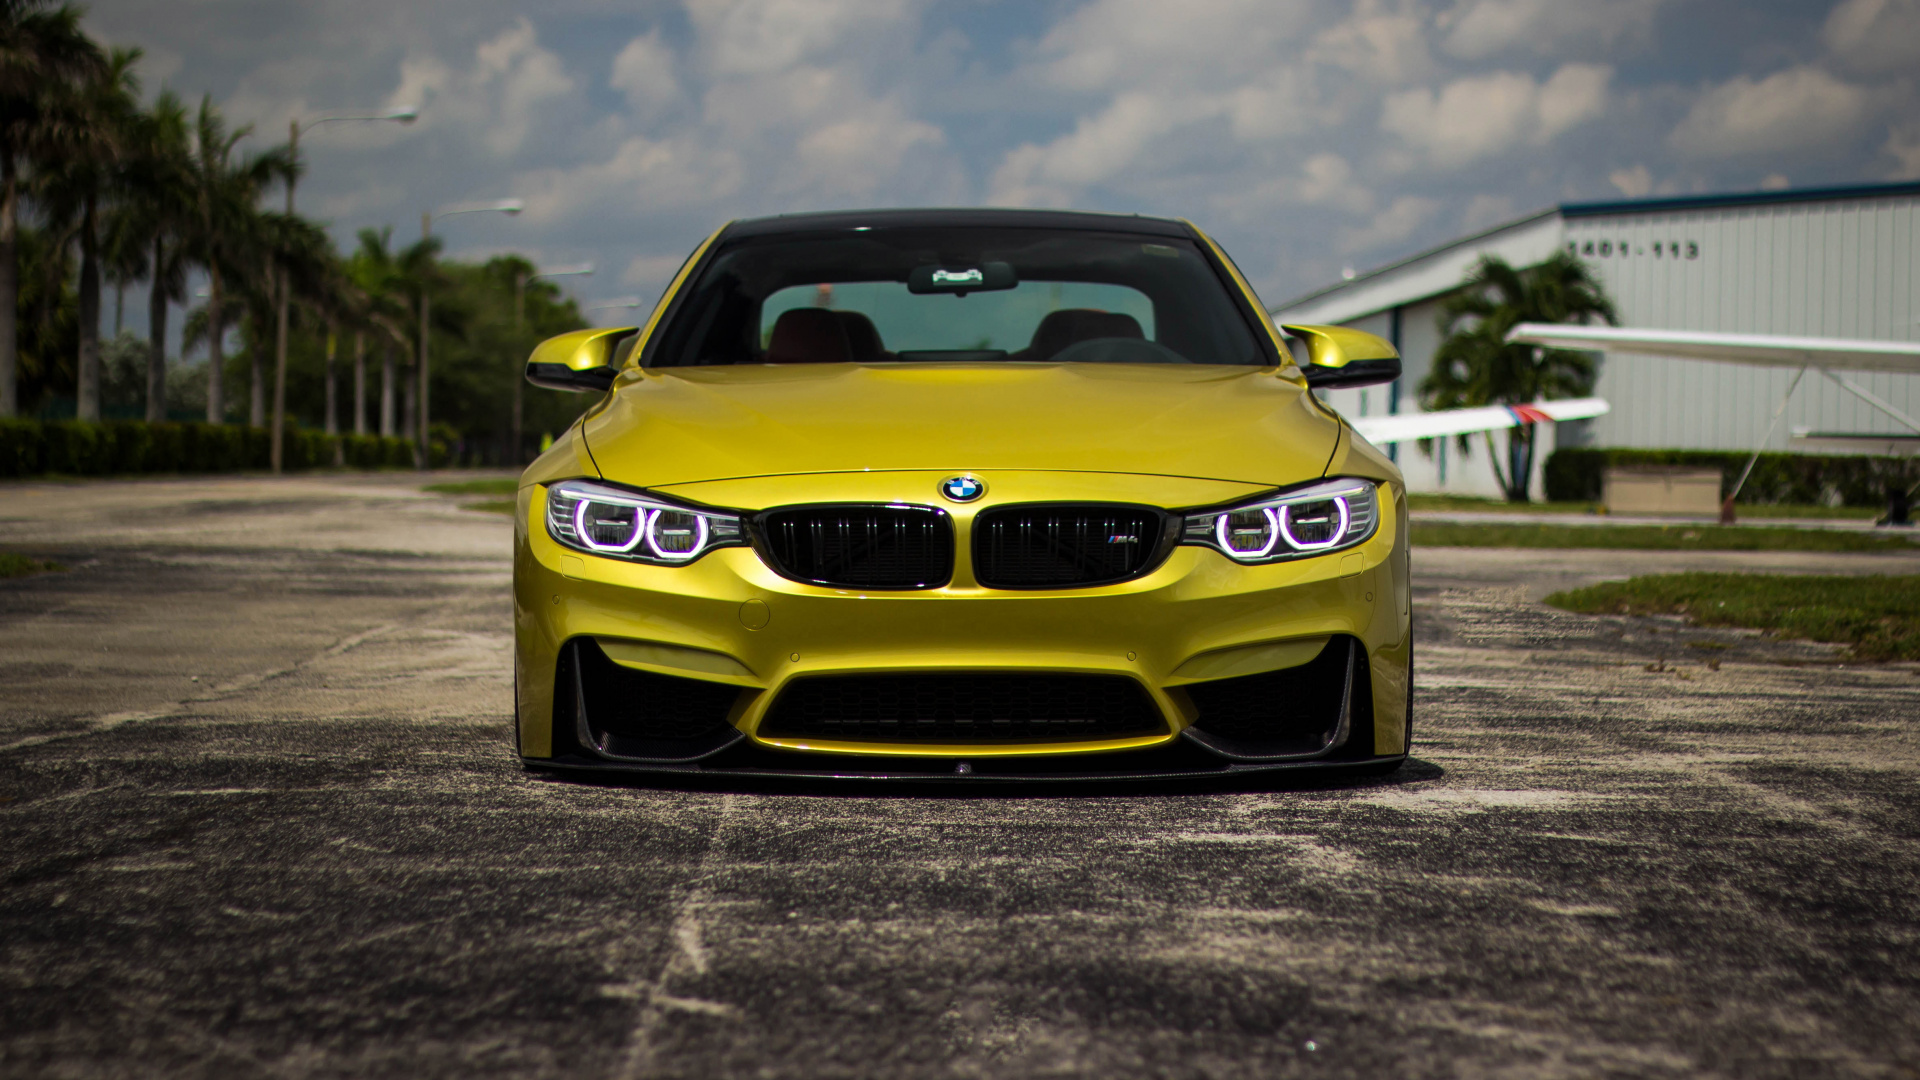 Yellow Bmw m 3 on Road During Daytime. Wallpaper in 1920x1080 Resolution